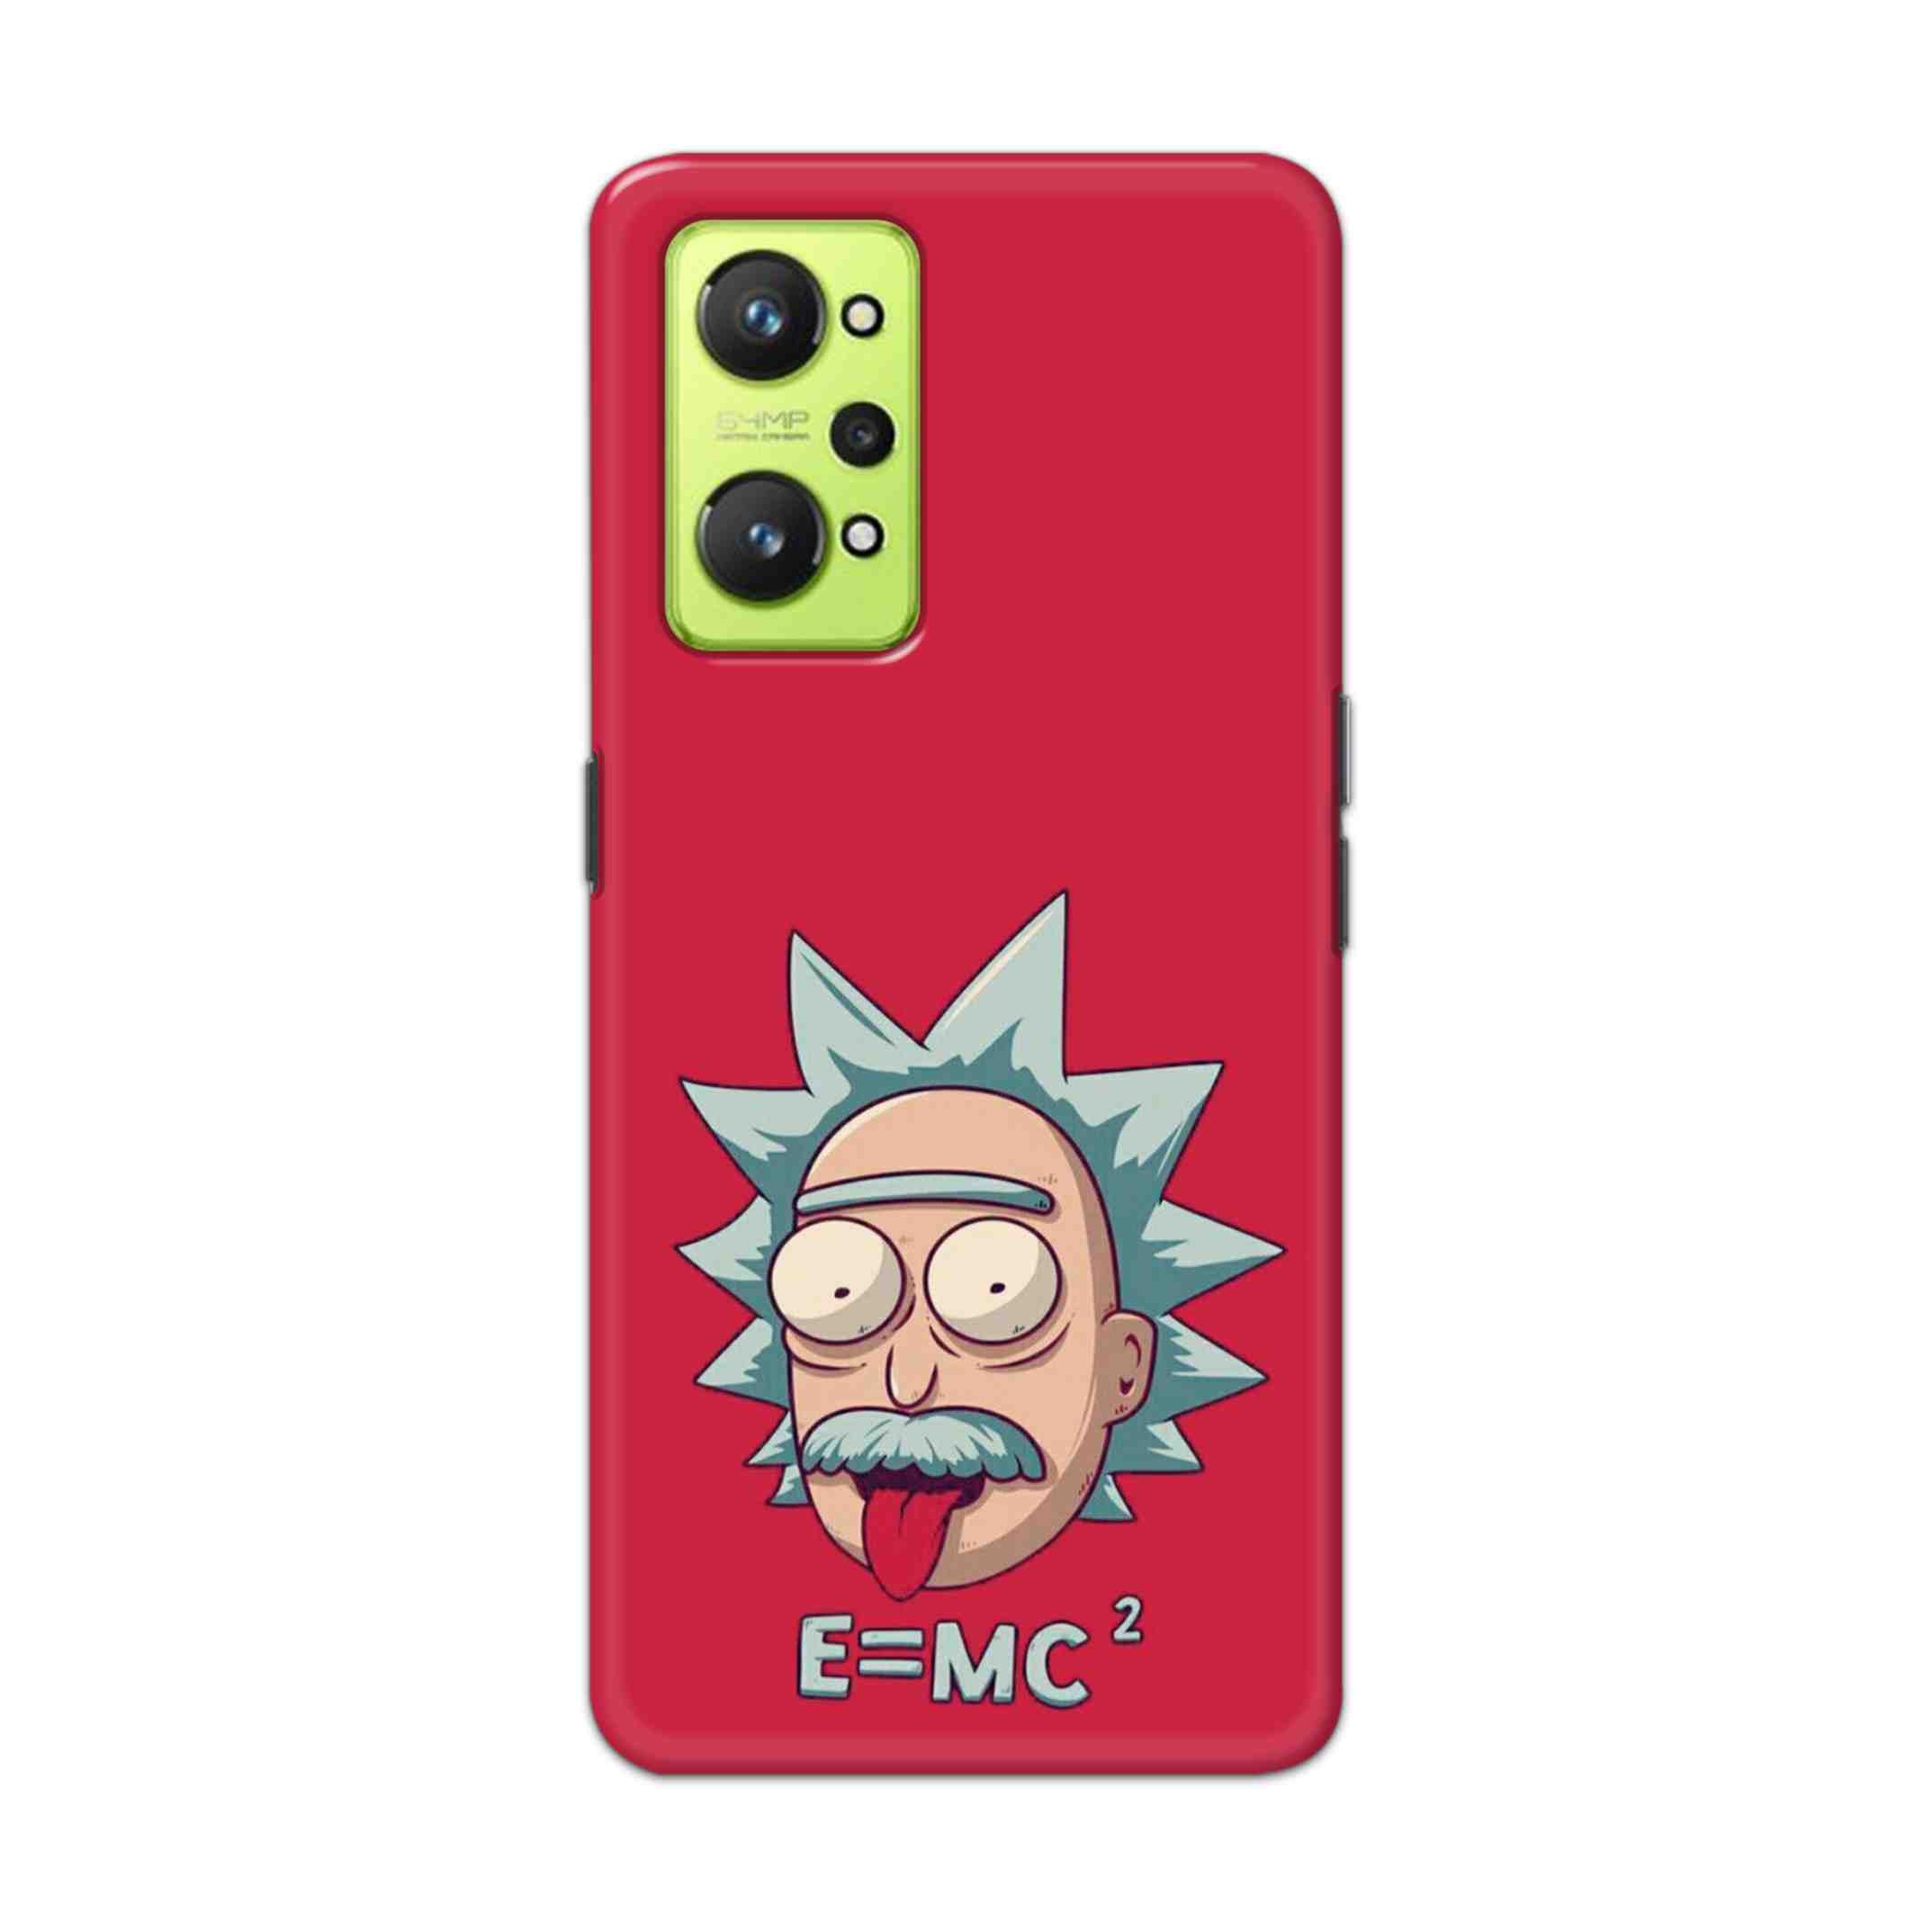 Buy E=Mc Hard Back Mobile Phone Case Cover For Realme GT Neo2 Online